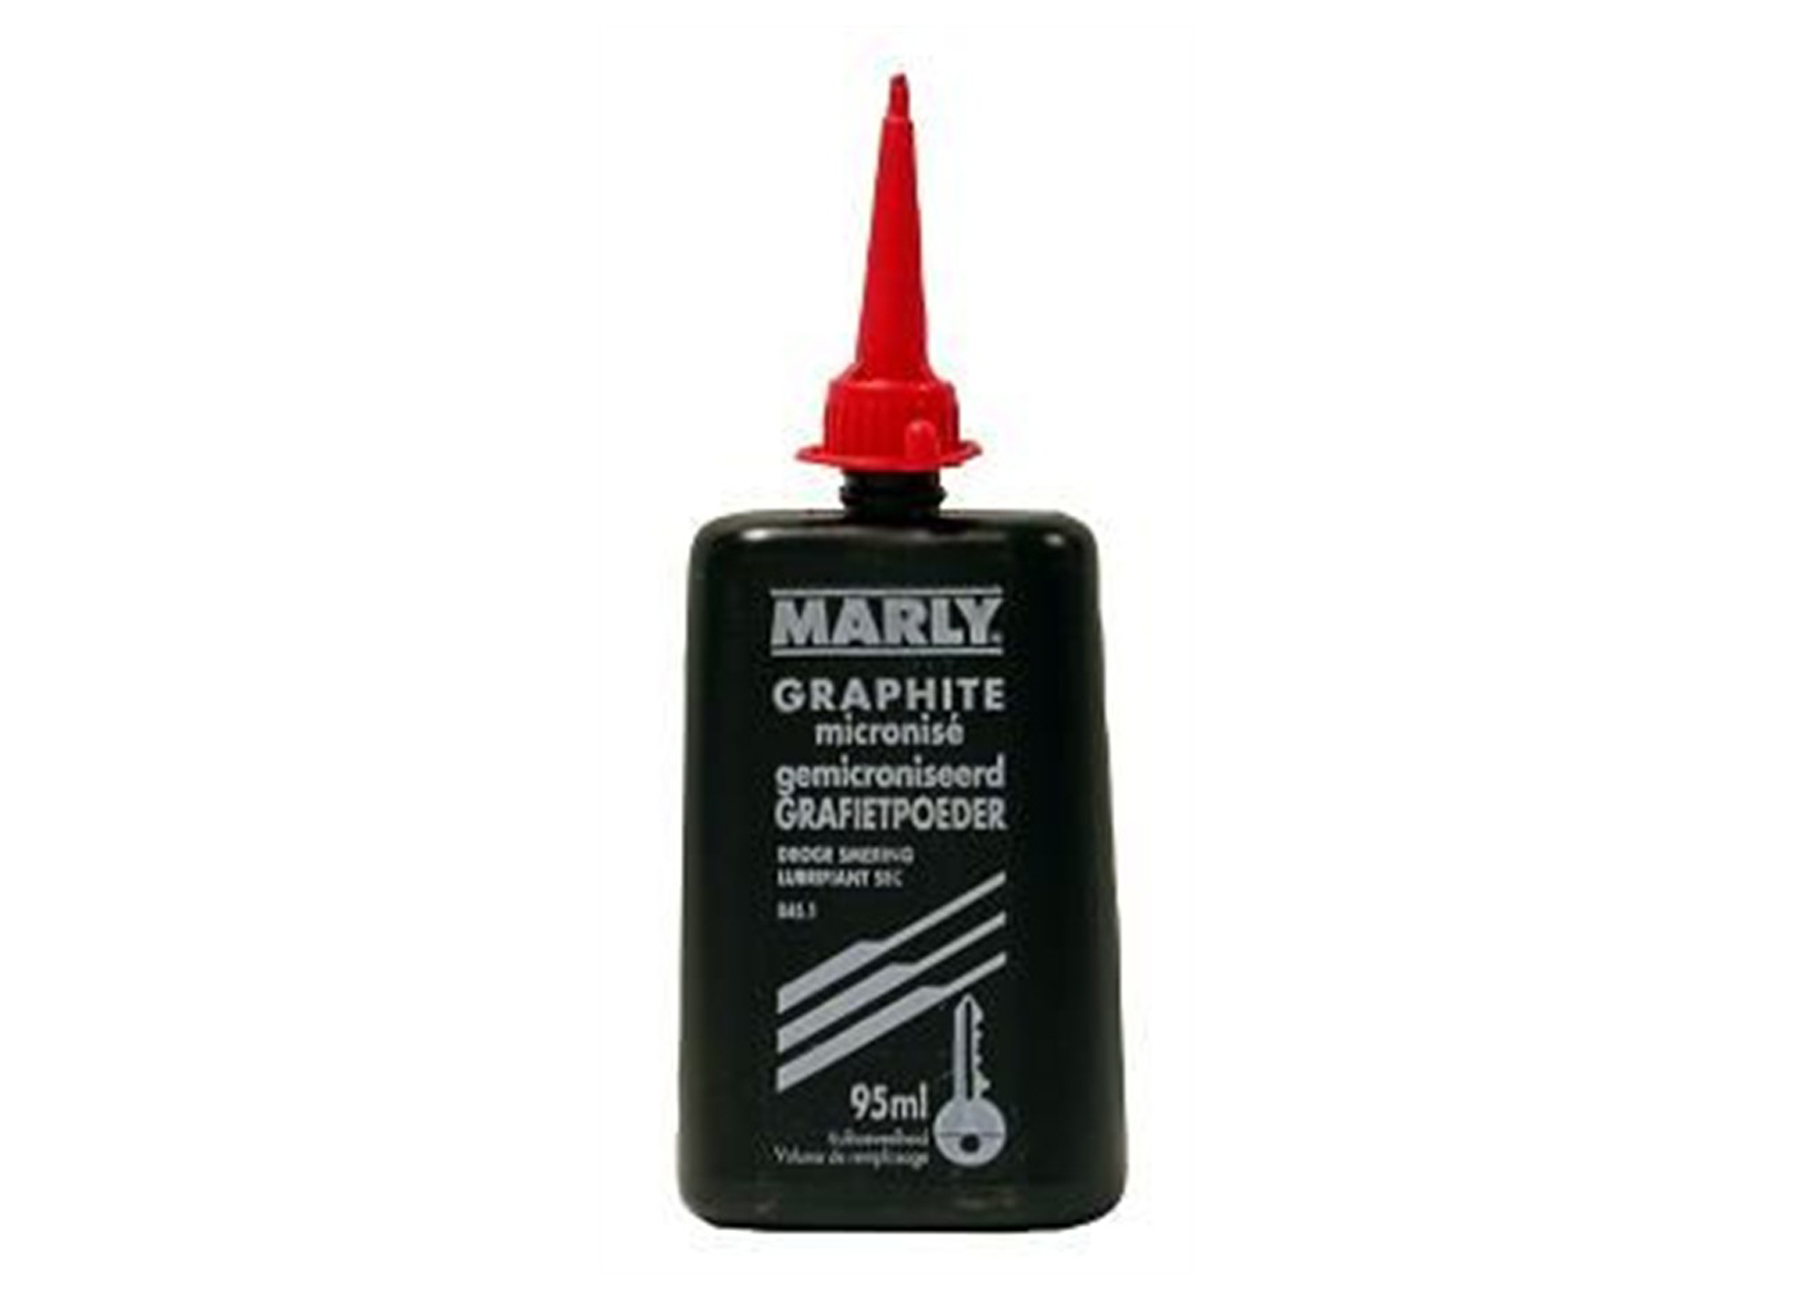 MARLY GRAPHITE MICRONISE 95ML